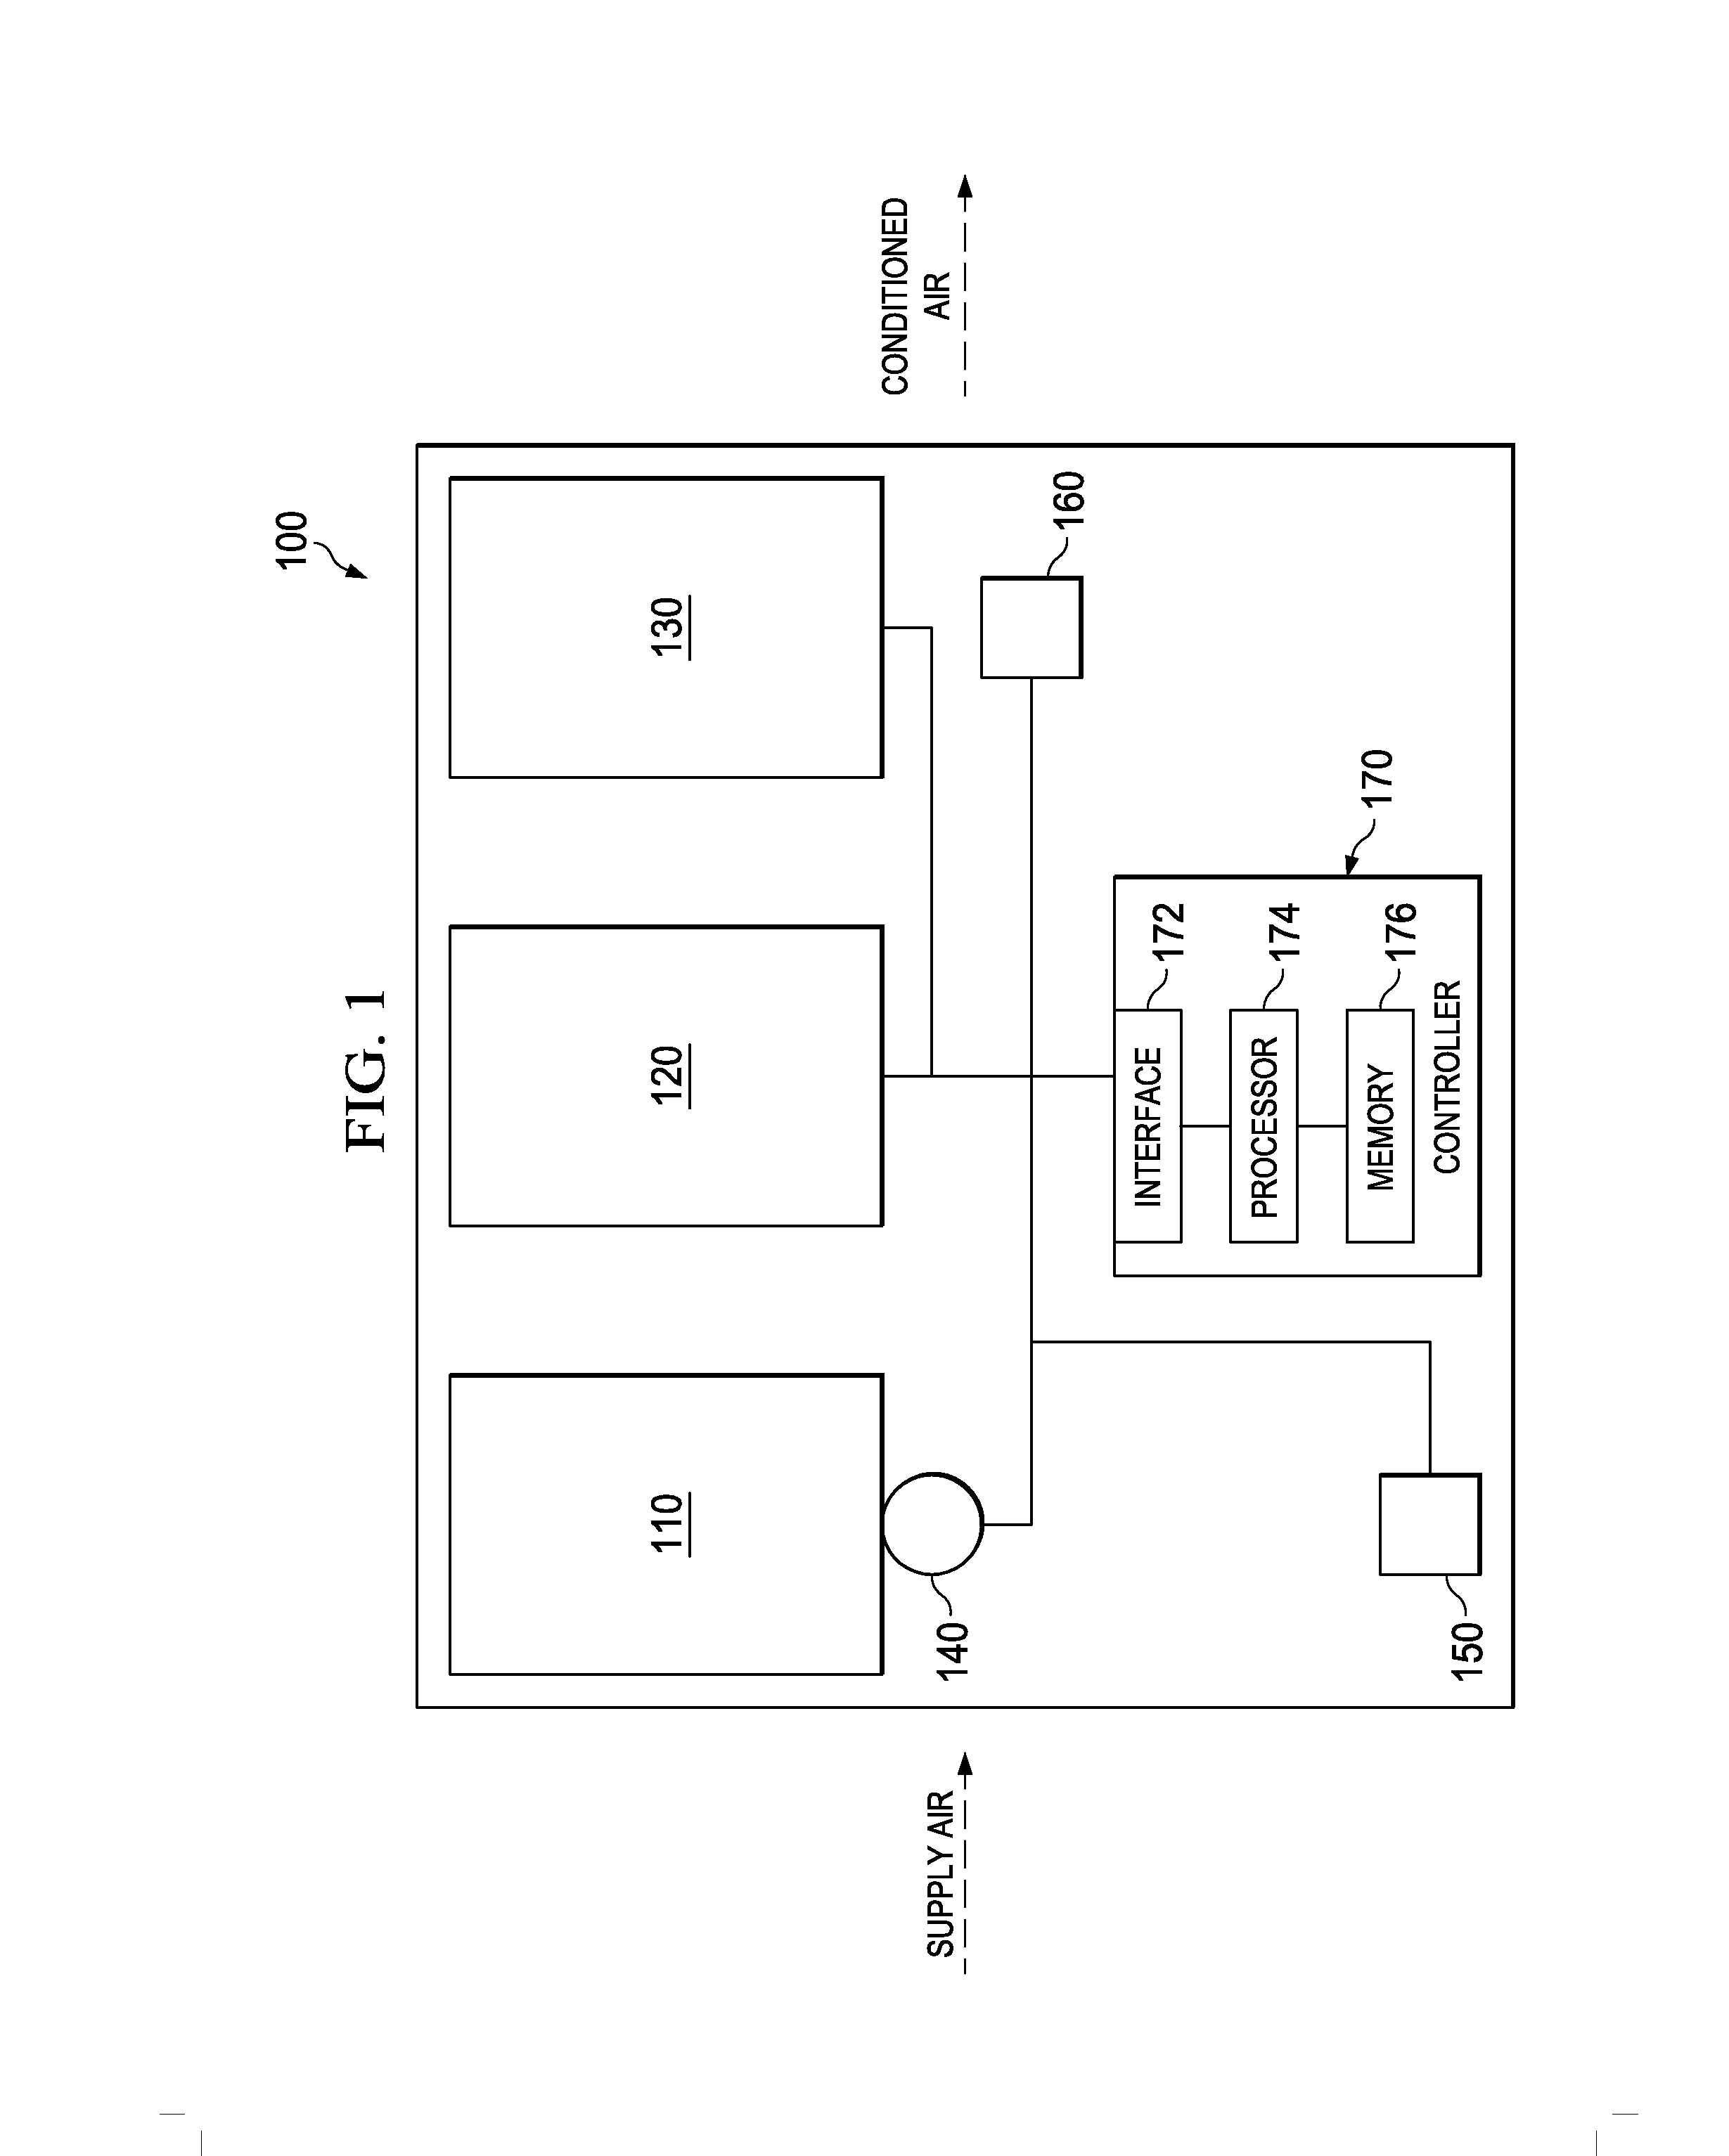 Methods of operating an HVAC system, an HVAC system and a controller therefor employing a self-check scheme and predetermined operating procedures associated with operating units of an HVAC system